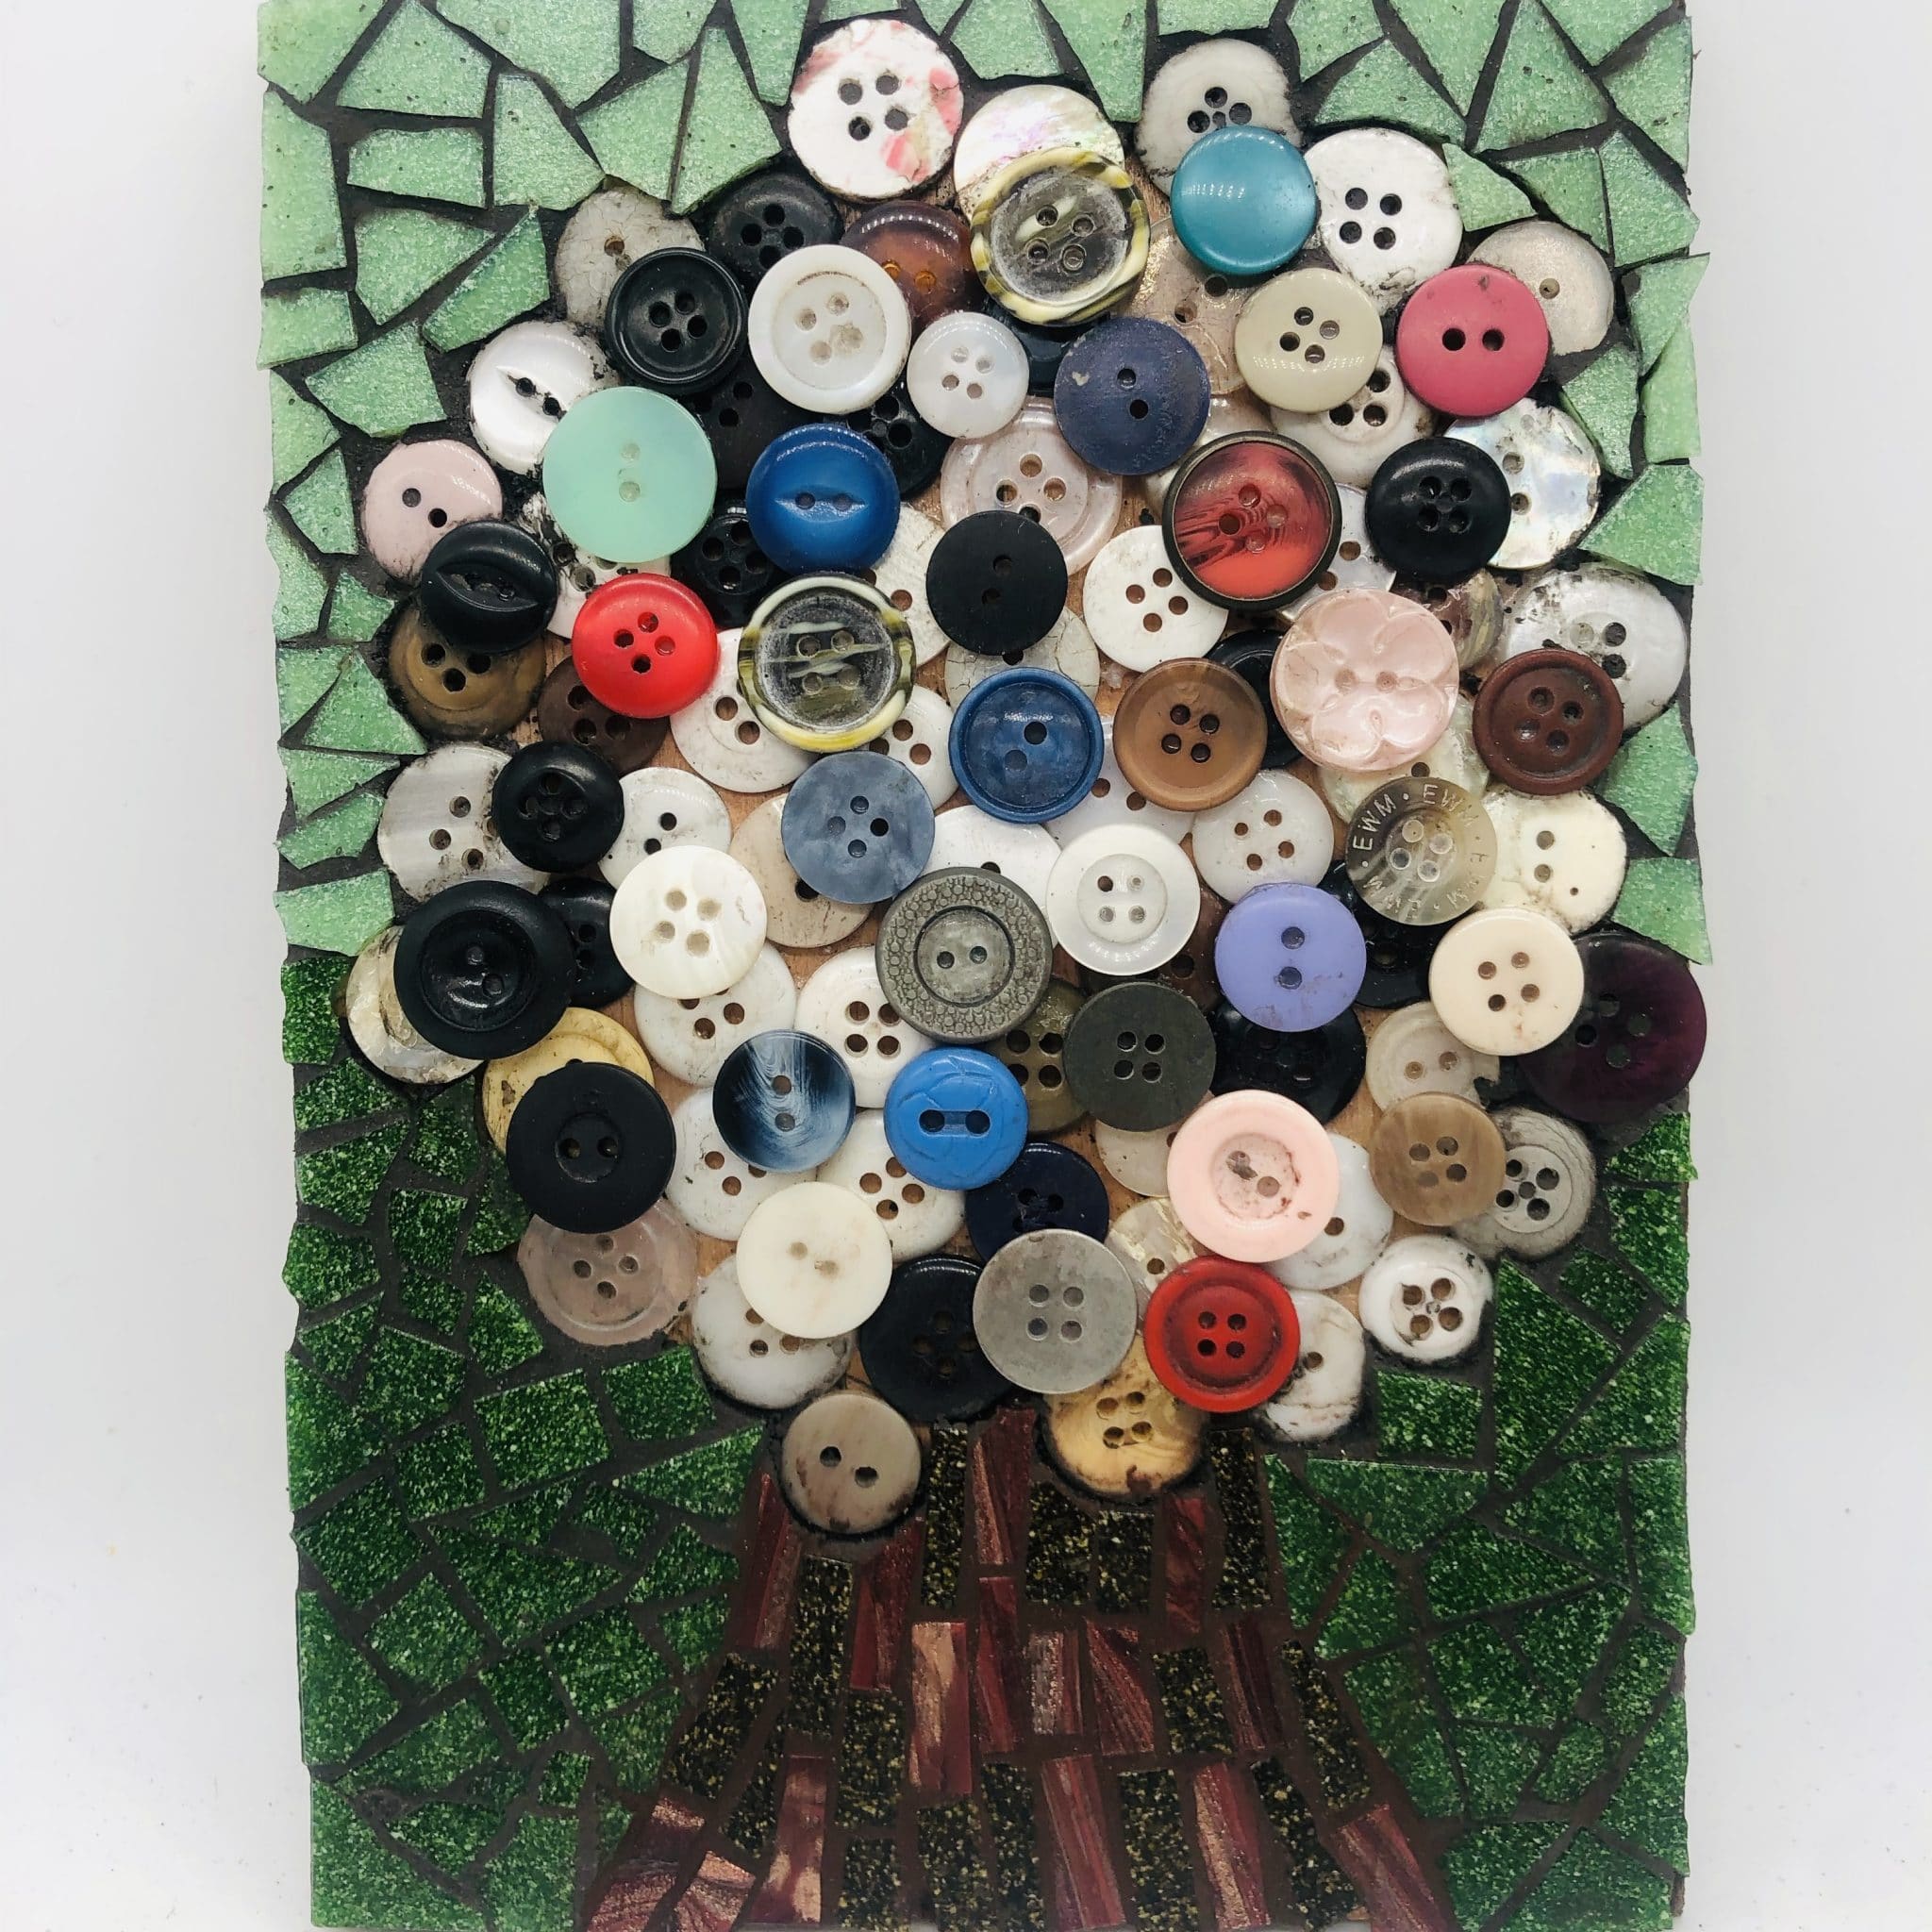 Tree mosaic picture using buttons and mosaic pieces